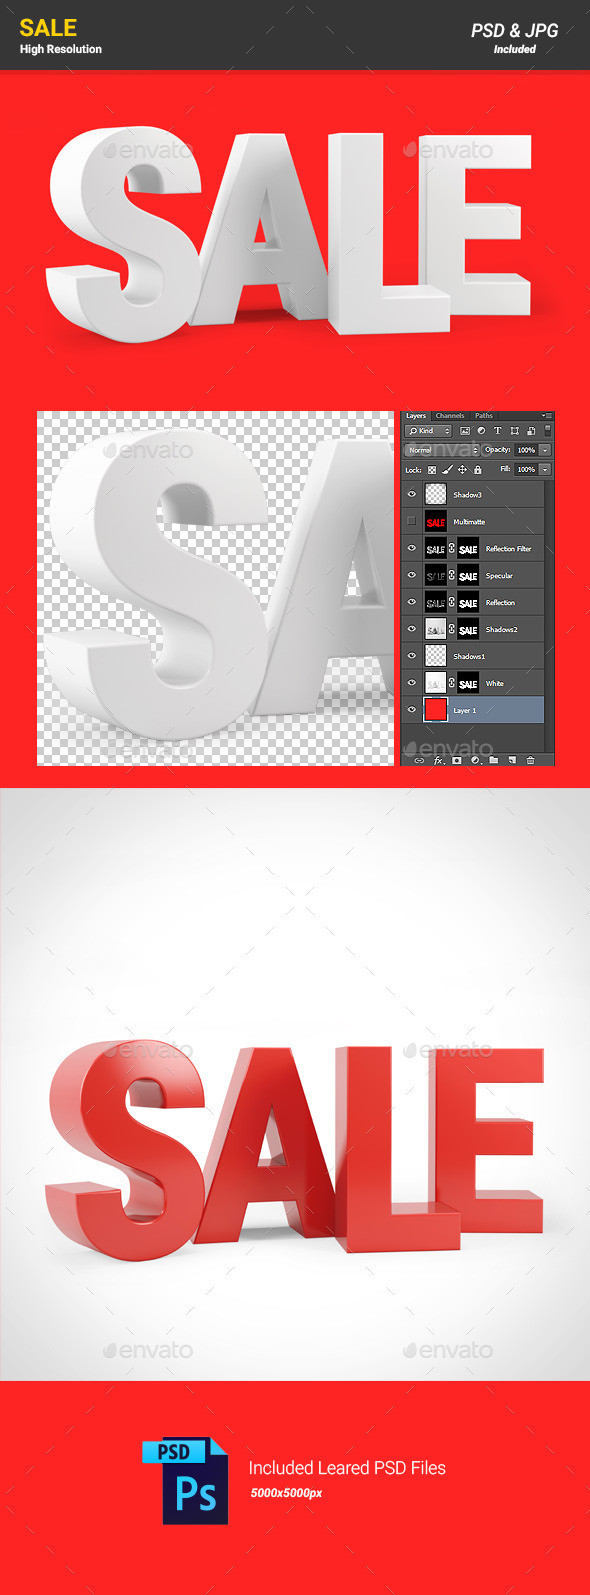 Sale2 all